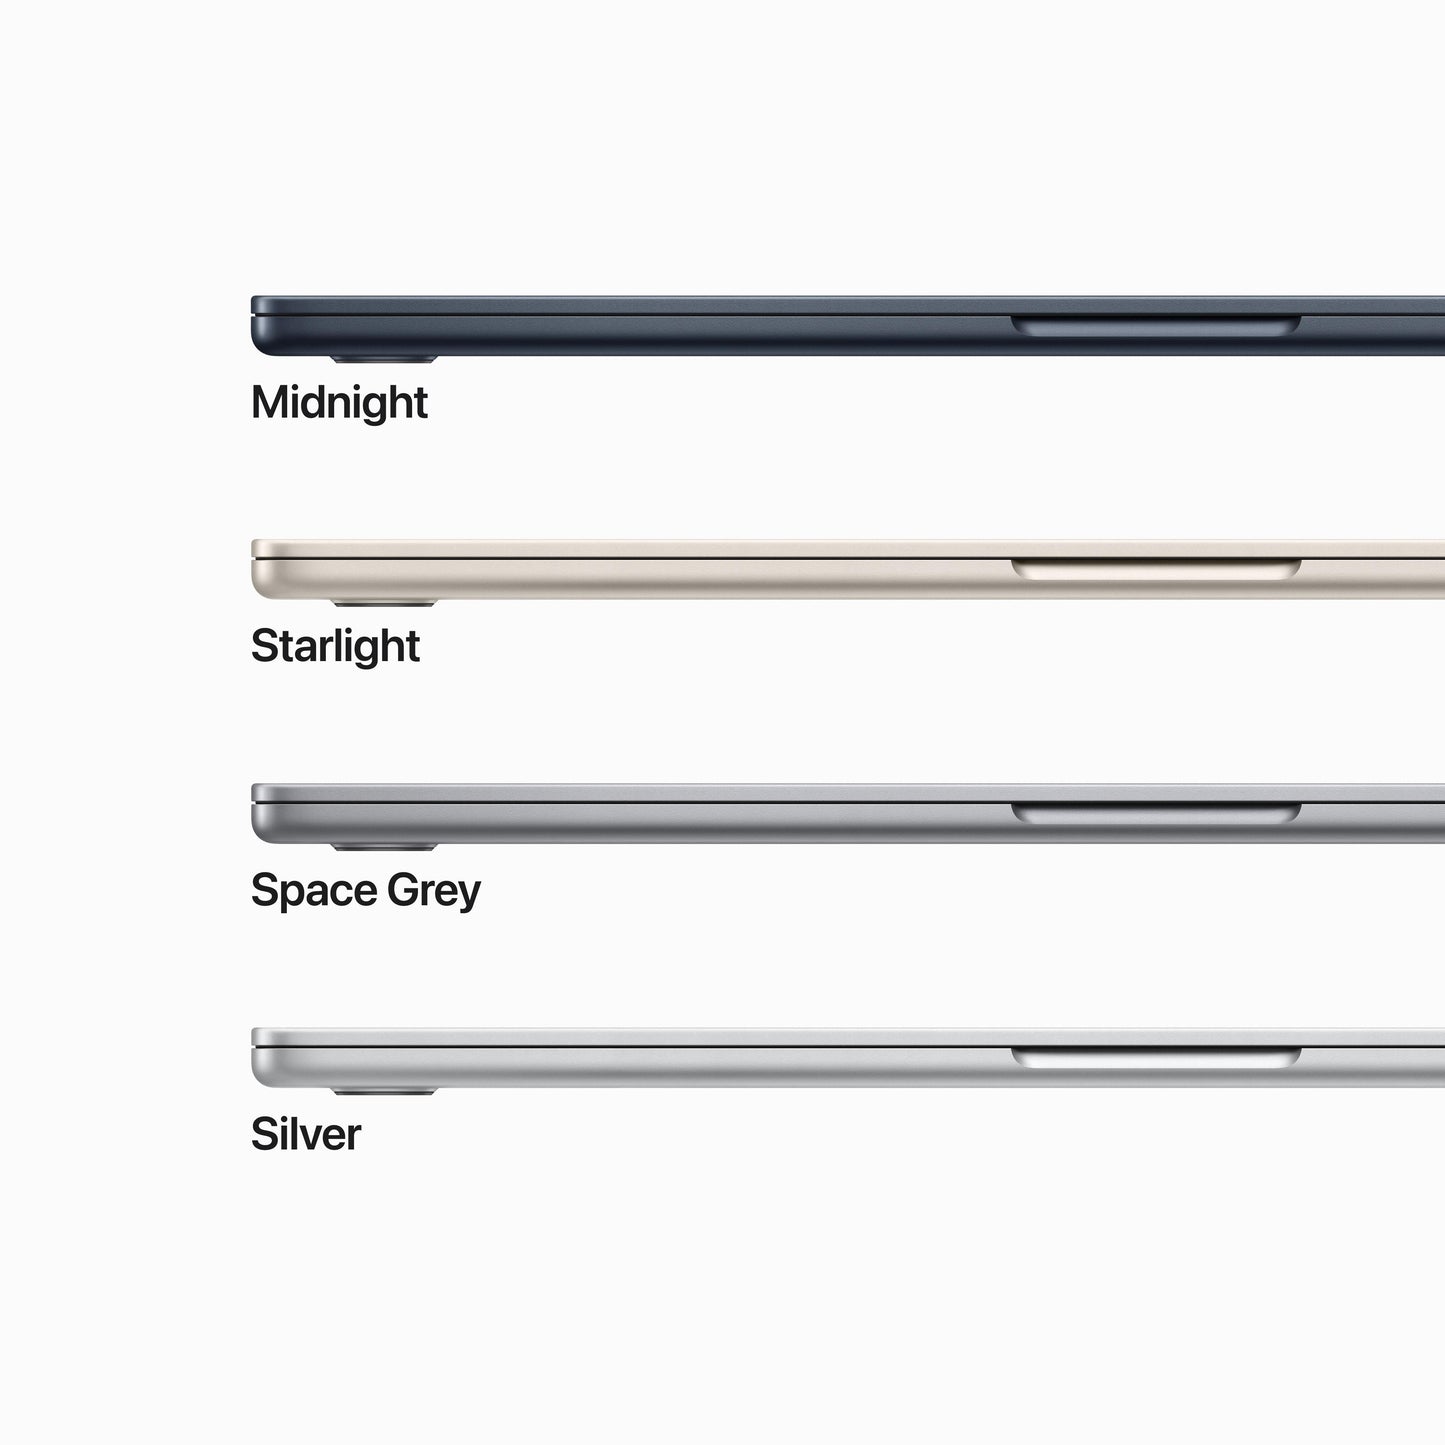 15-inch MacBook Air: Apple M2 chip with 8-core CPU and 10-core GPU, 512GB SSD - Space Grey